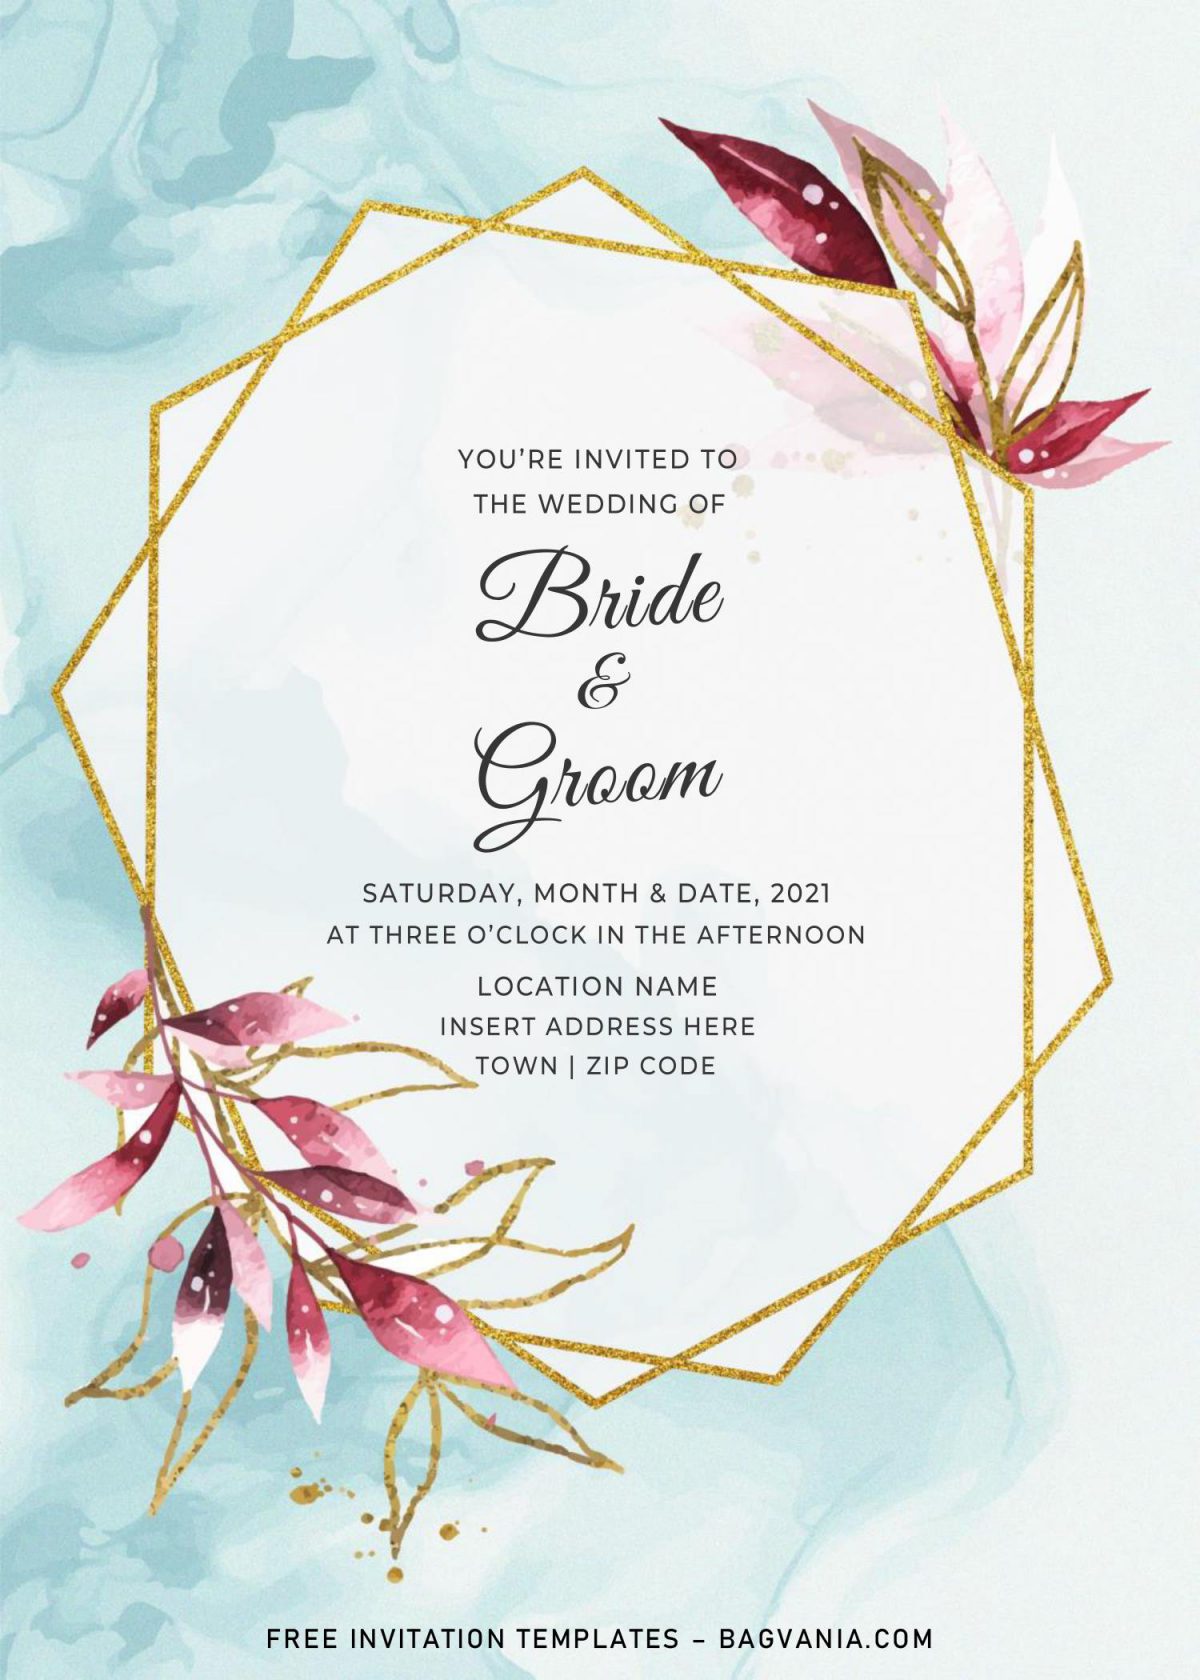 Free Gold Boho Wedding Invitation Templates For Word and has greenery leaves